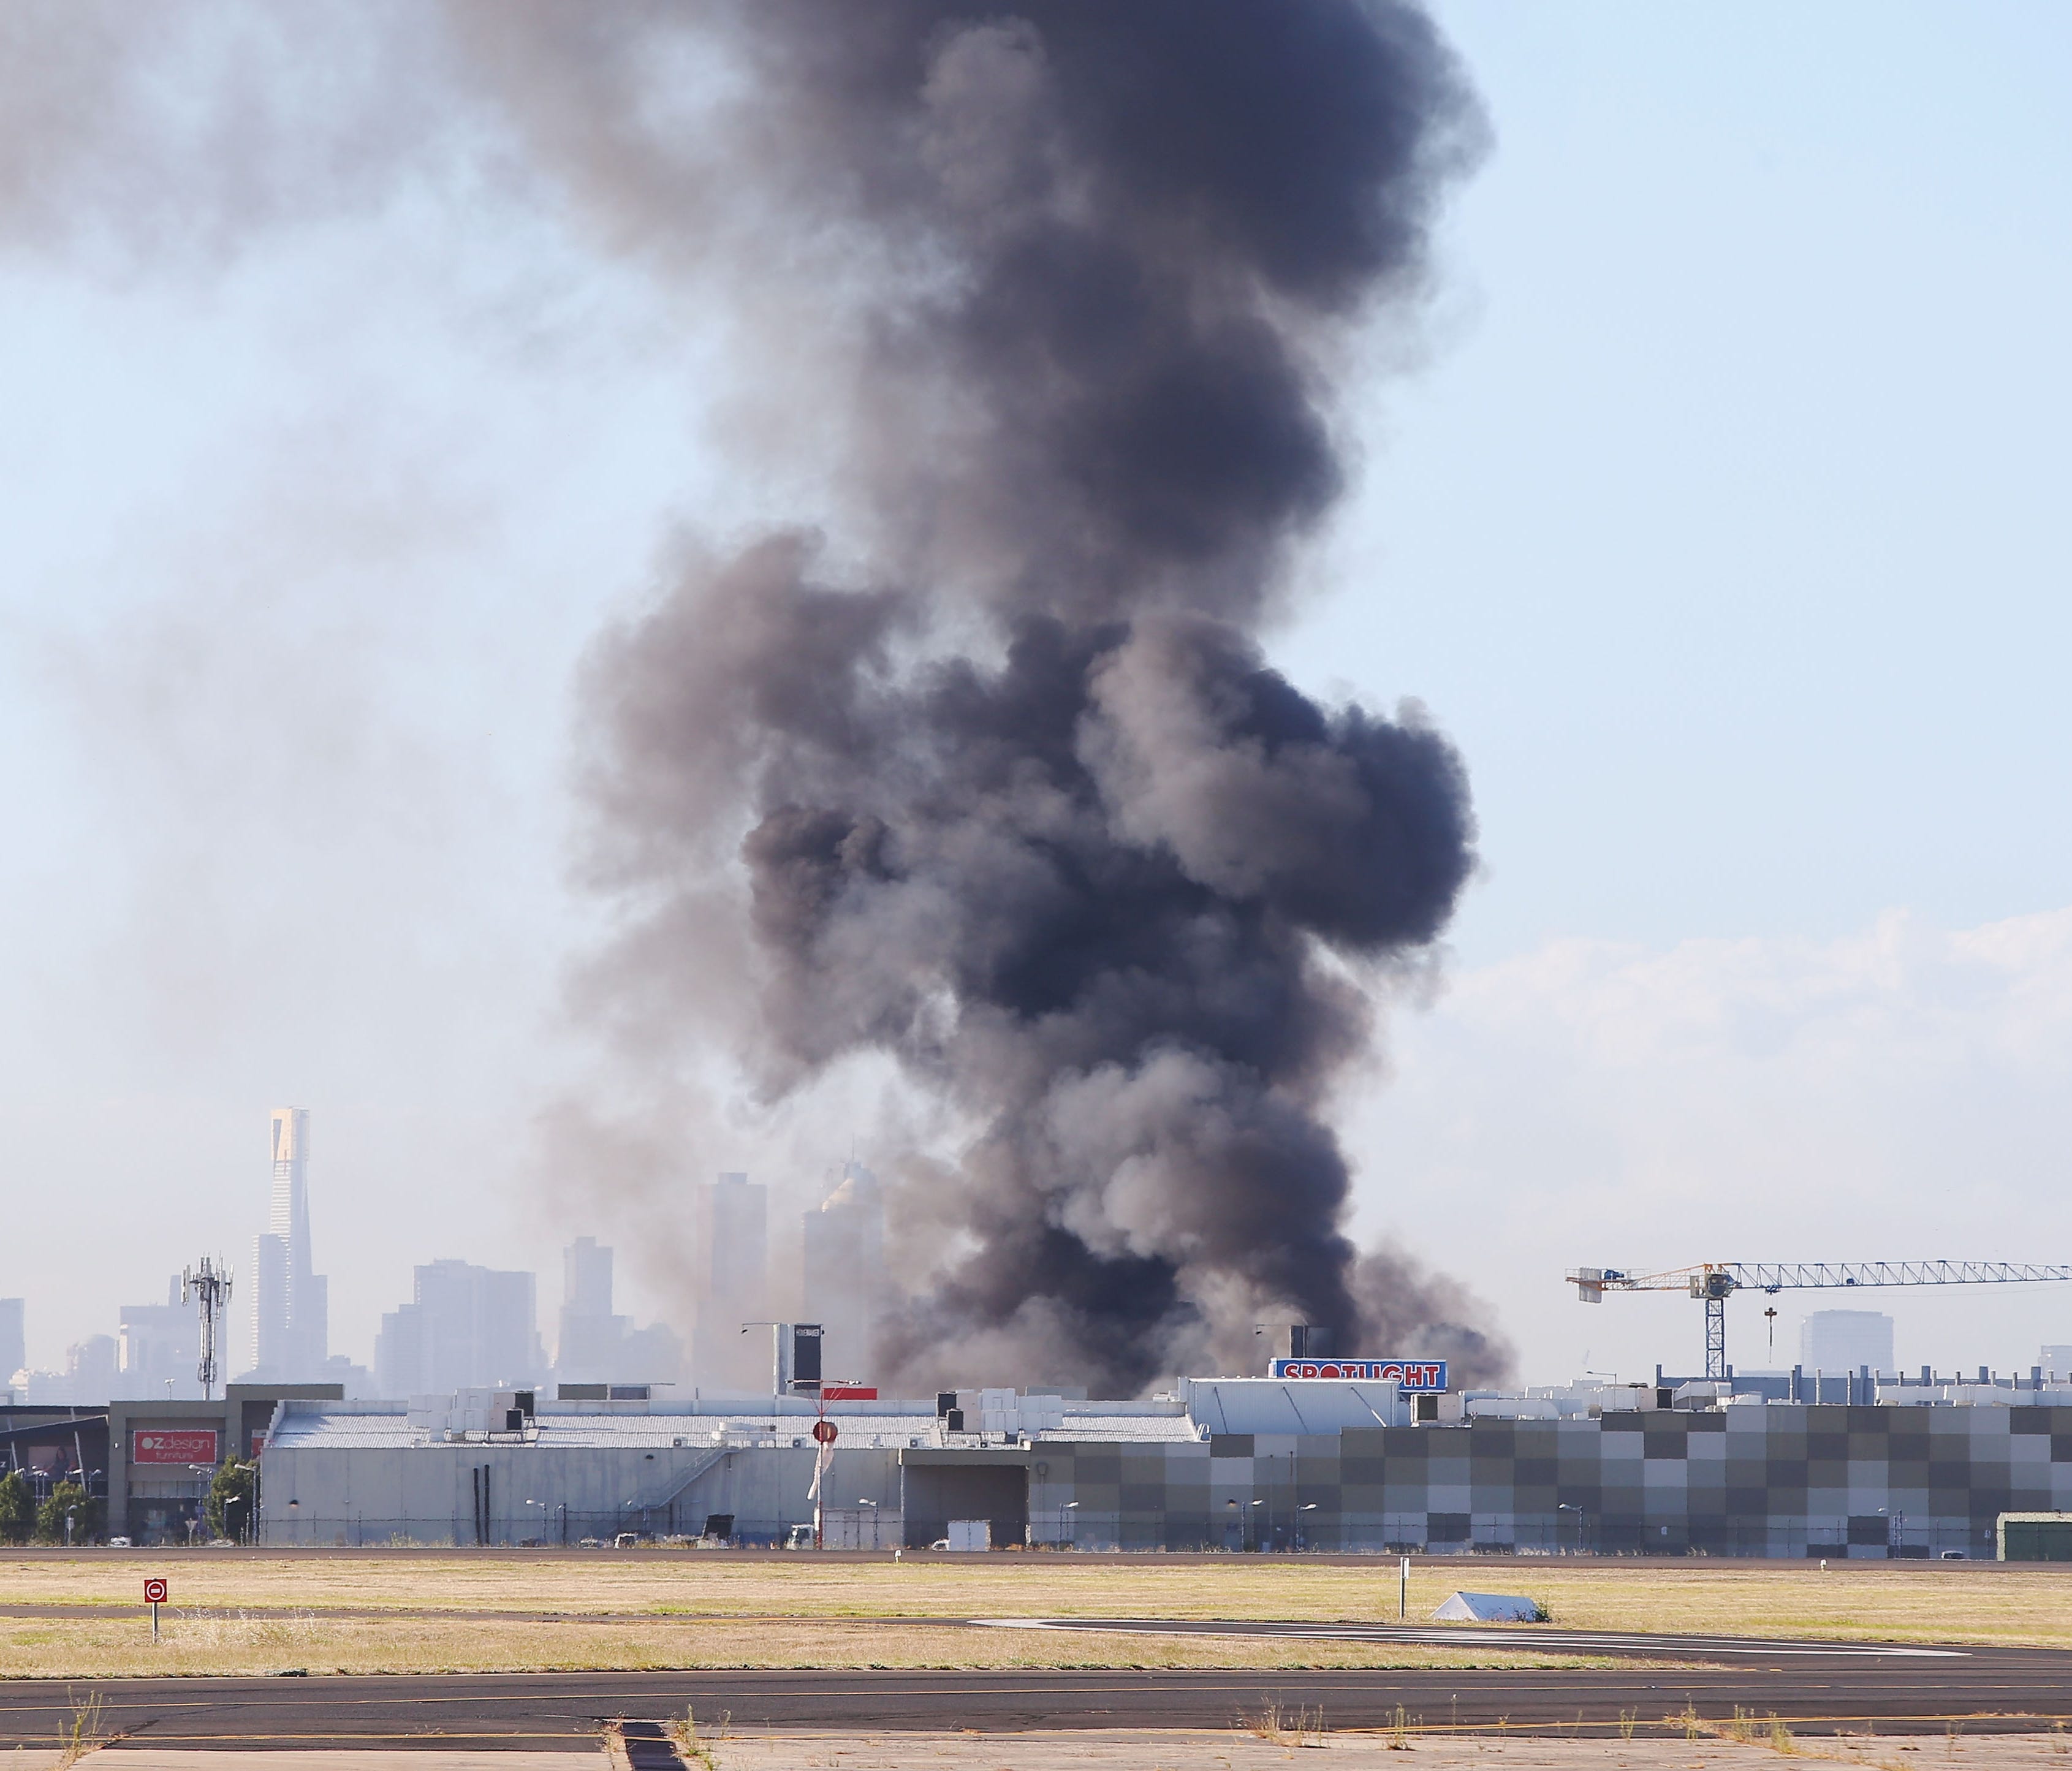 A view from the tarmac at Melbourne's Essendon Airport is seen after a charter plane leaving the airport crashed on Feb. 21, 2017 in Melbourne, Australia.